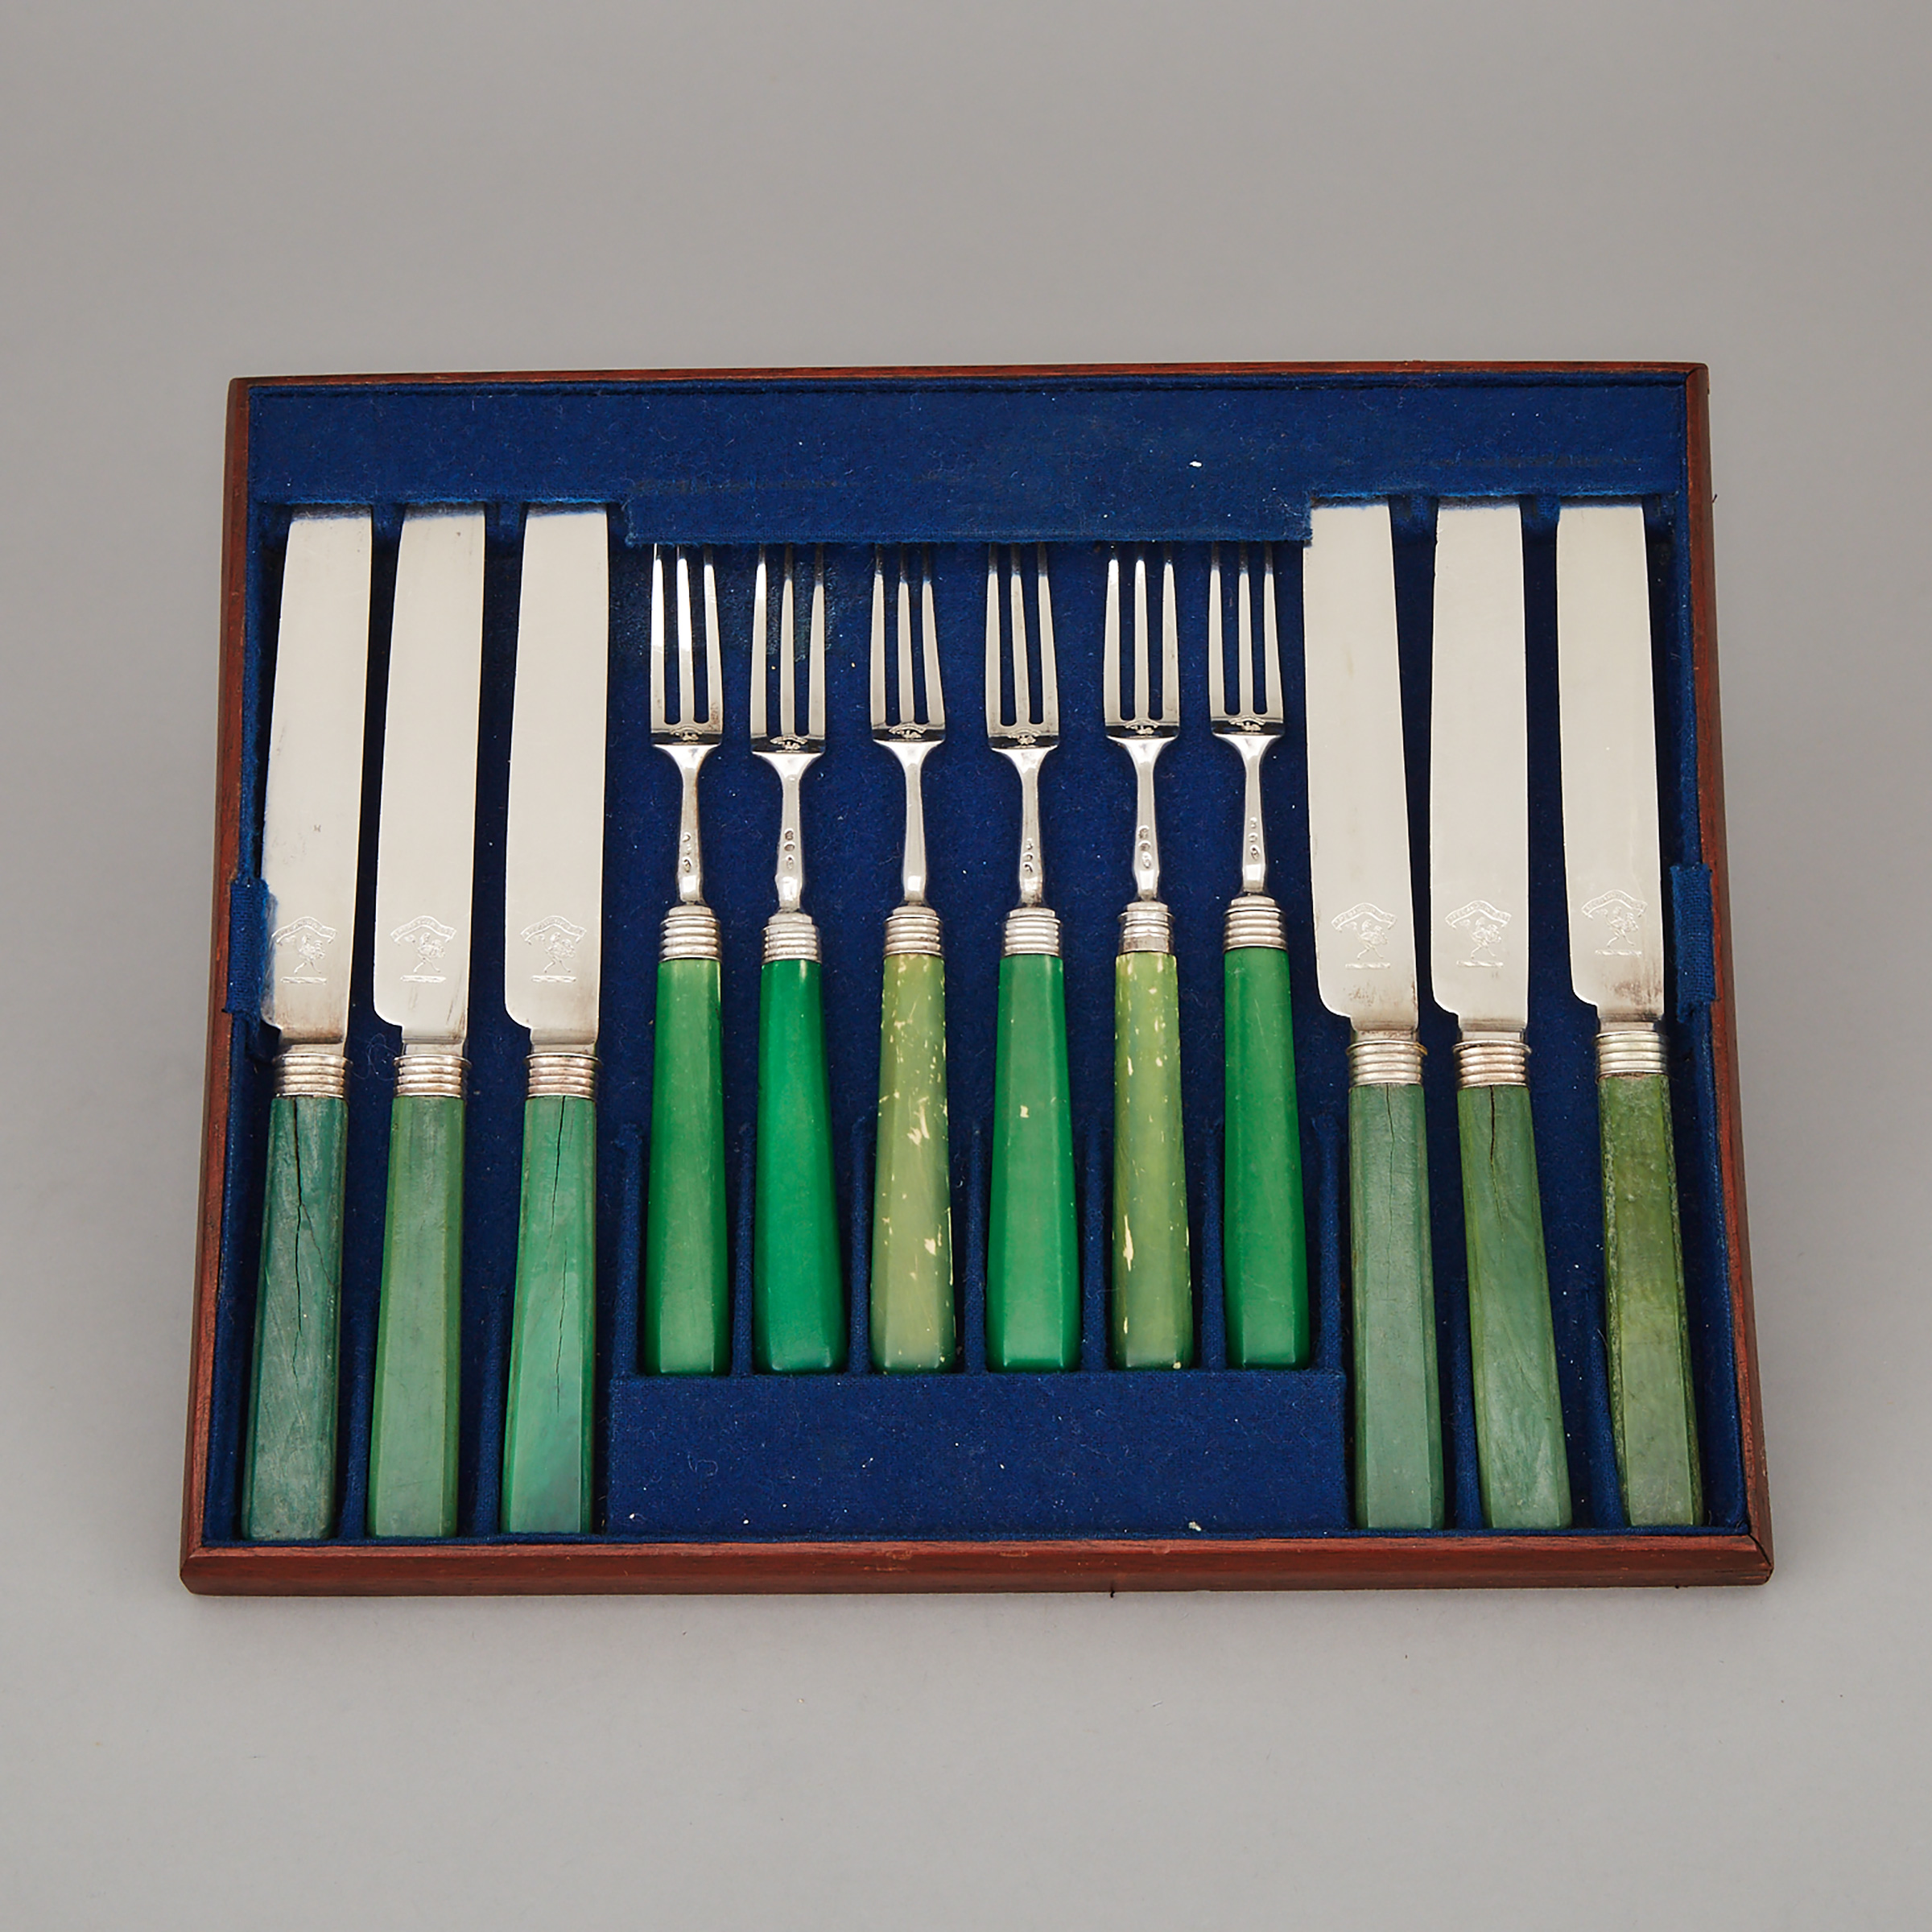 Six George IV Silver and Green Stained Ivory Knives and Six Forks, Joseph Willmore and John Mewburn (probably), London, c.1820